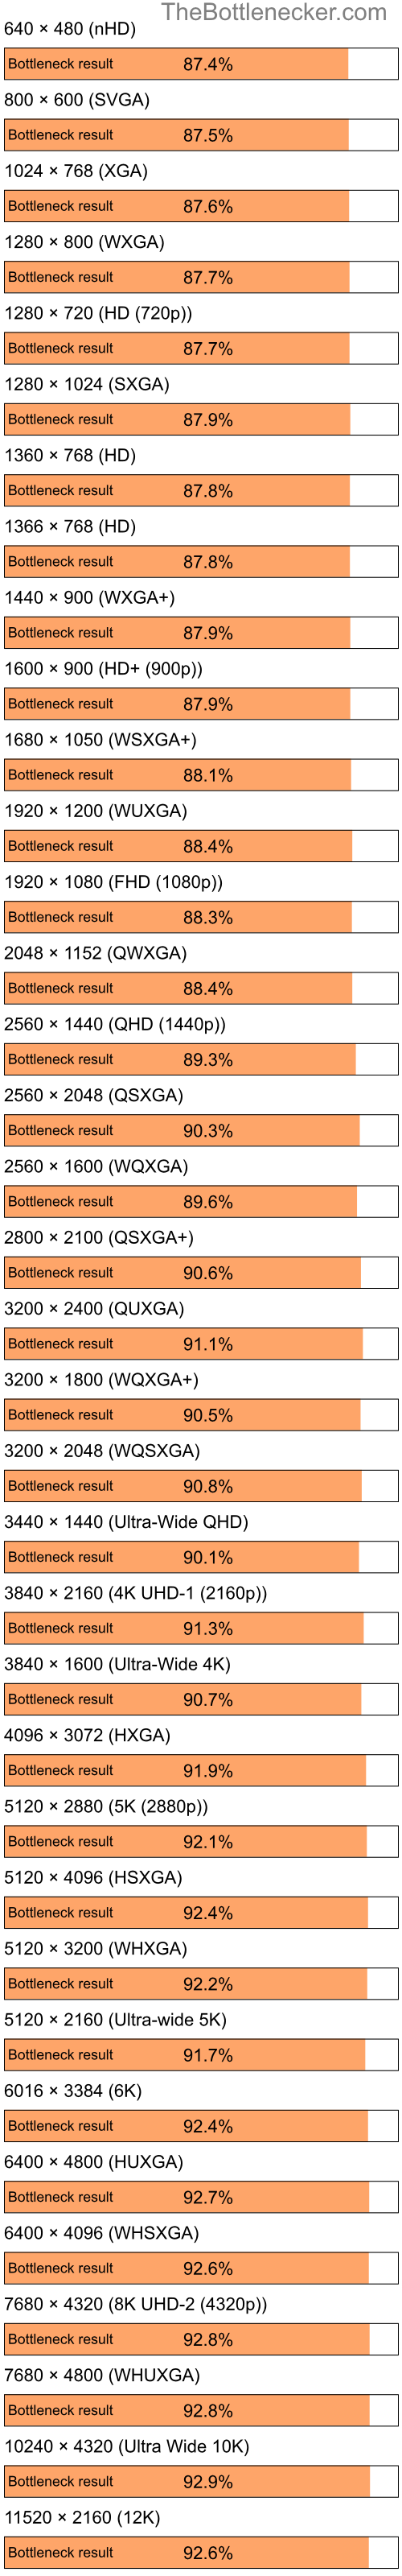 Bottleneck results by resolution for Intel Pentium 4 and NVIDIA GeForce4 MX 420 in Processor Intense Tasks